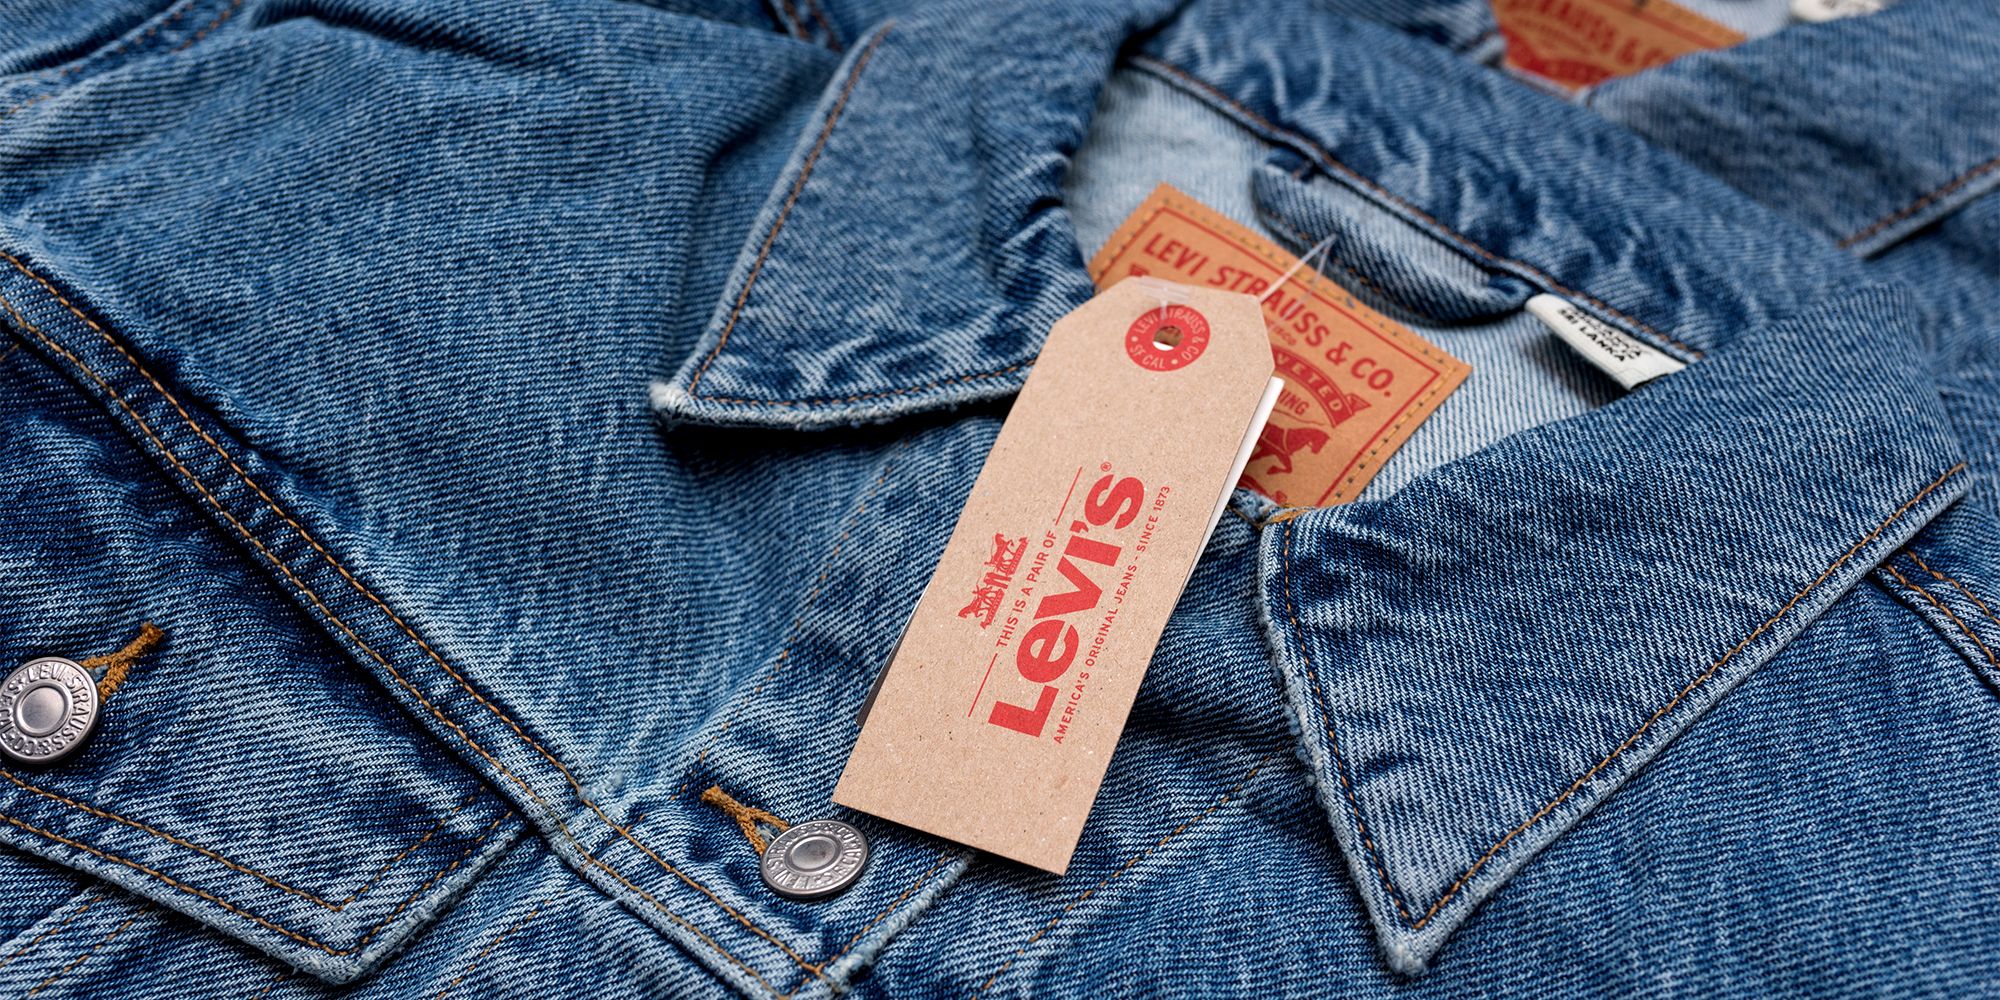 Levi's Just Took a Major Stand Against Gun Violence in America